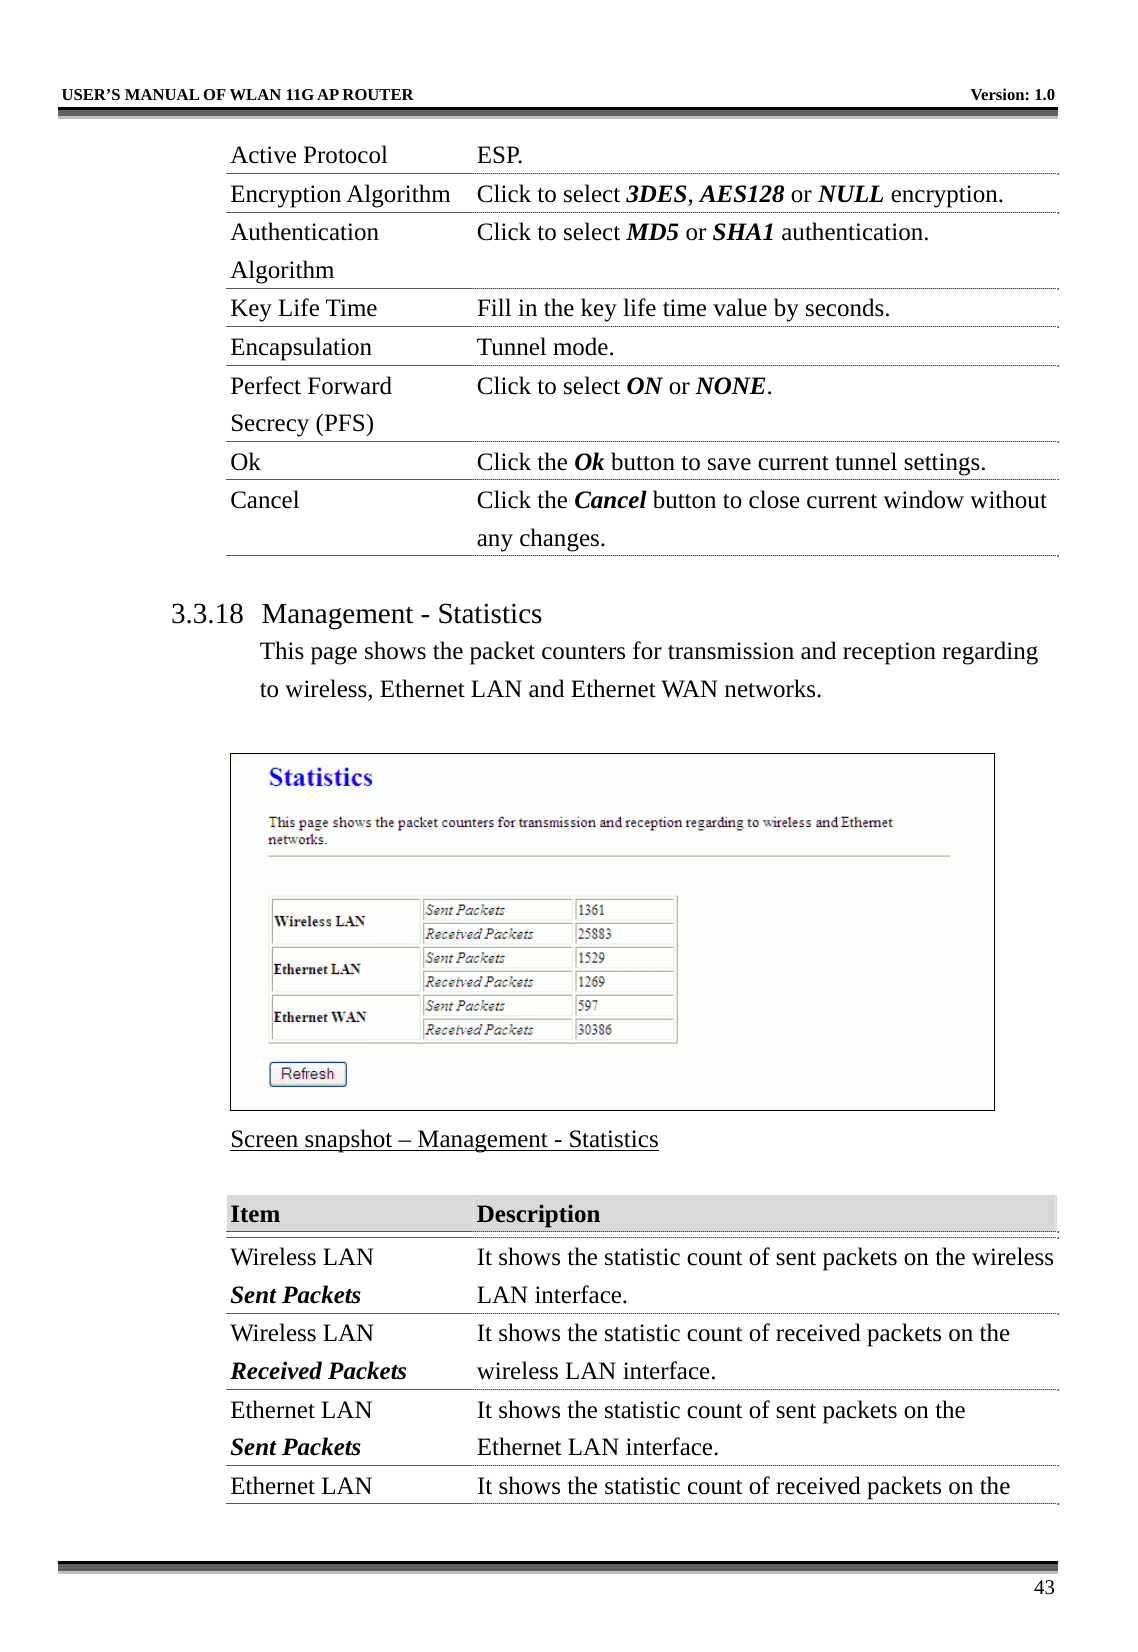   USER’S MANUAL OF WLAN 11G AP ROUTER    Version: 1.0     43 Active Protocol  ESP. Encryption Algorithm  Click to select 3DES, AES128 or NULL encryption. Authentication Algorithm Click to select MD5 or SHA1 authentication. Key Life Time  Fill in the key life time value by seconds. Encapsulation Tunnel mode. Perfect Forward Secrecy (PFS) Click to select ON or NONE. Ok Click the Ok button to save current tunnel settings. Cancel Click the Cancel button to close current window without any changes.  3.3.18  Management - Statistics This page shows the packet counters for transmission and reception regarding to wireless, Ethernet LAN and Ethernet WAN networks.   Screen snapshot – Management - Statistics  Item  Description   Wireless LAN Sent Packets It shows the statistic count of sent packets on the wireless LAN interface. Wireless LAN Received Packets It shows the statistic count of received packets on the wireless LAN interface. Ethernet LAN Sent Packets It shows the statistic count of sent packets on the Ethernet LAN interface. Ethernet LAN  It shows the statistic count of received packets on the 